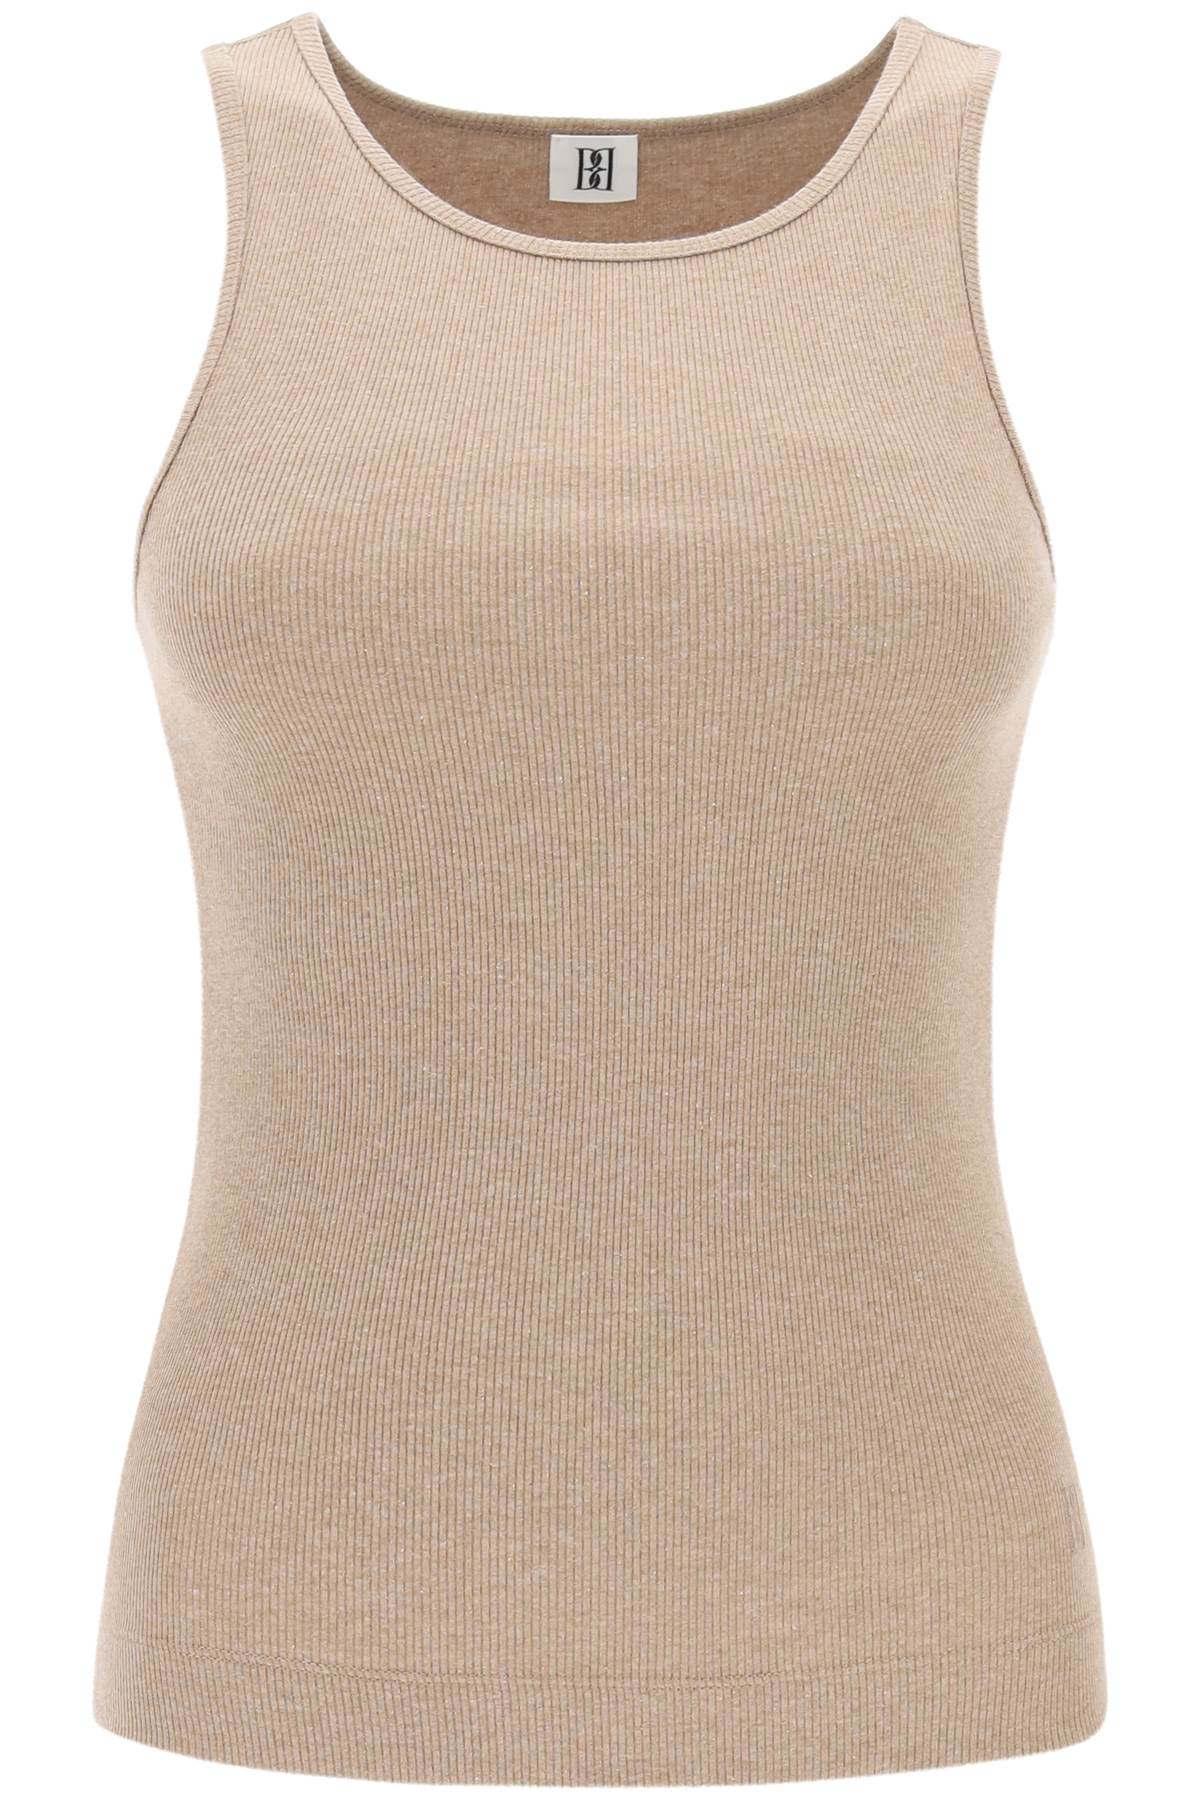 By Malene Birger Amani Ribbed Tank Top   Brown